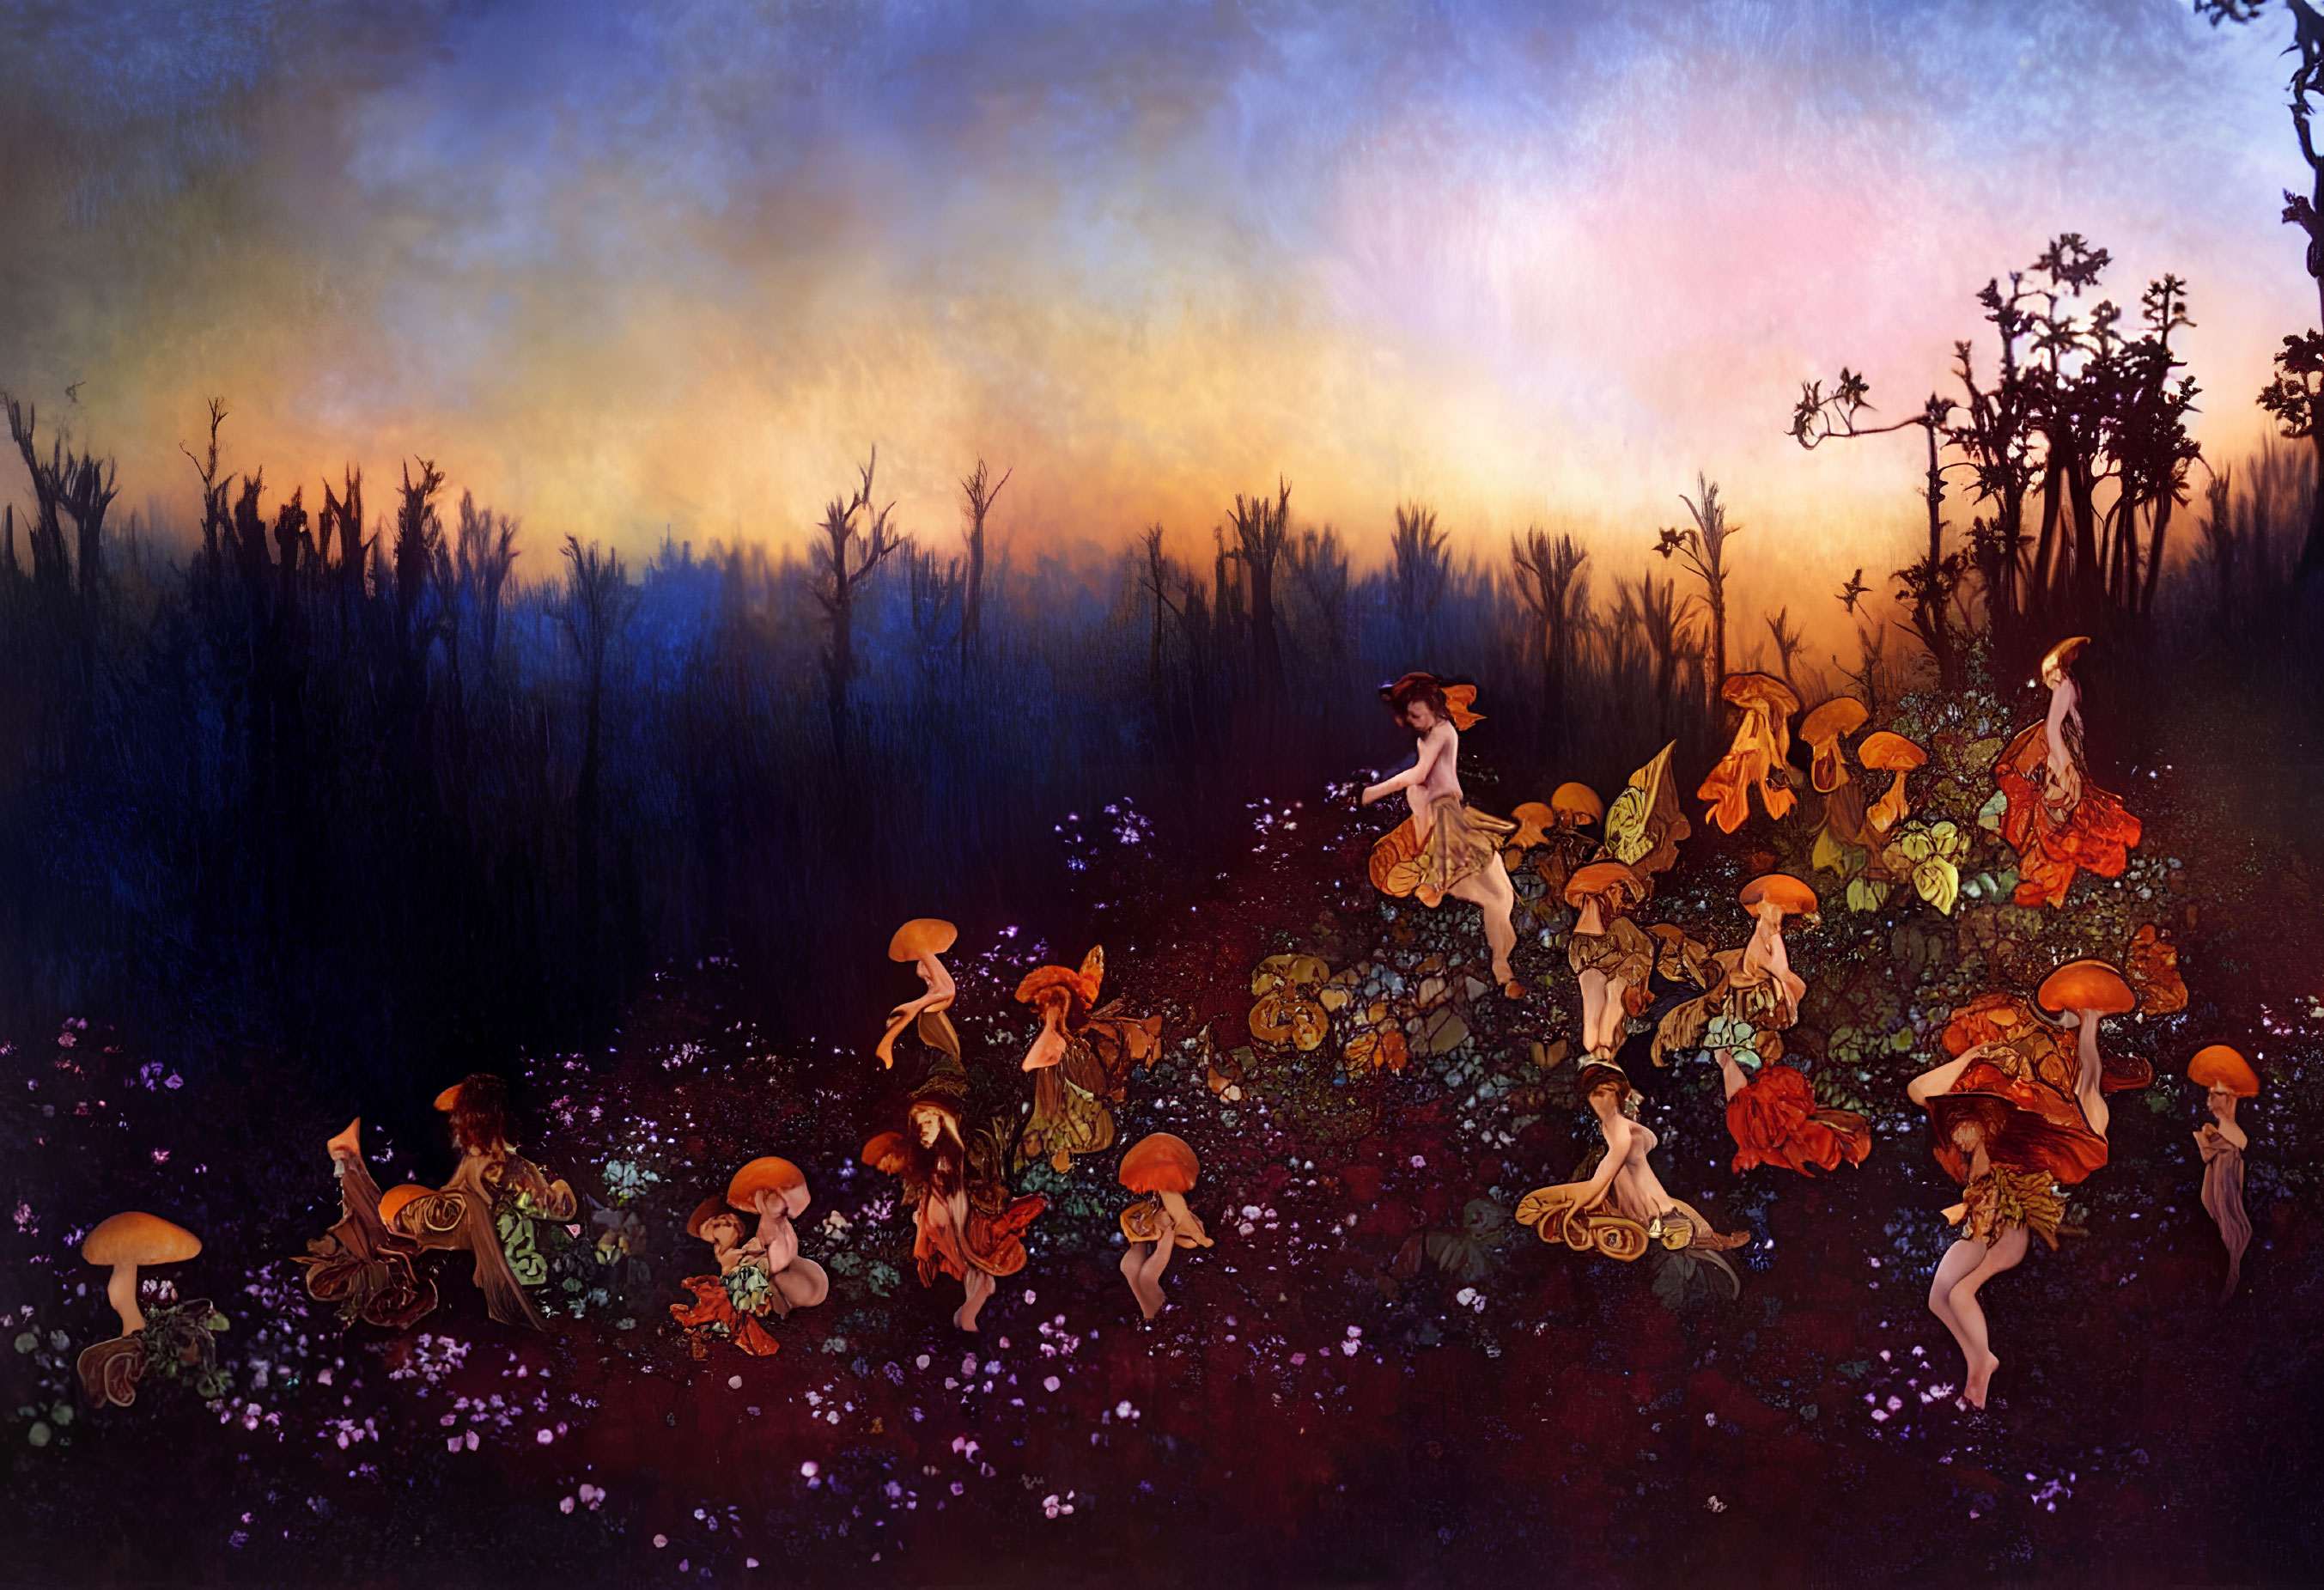 Fairies with mushroom caps in forest at dusk with radiant sky